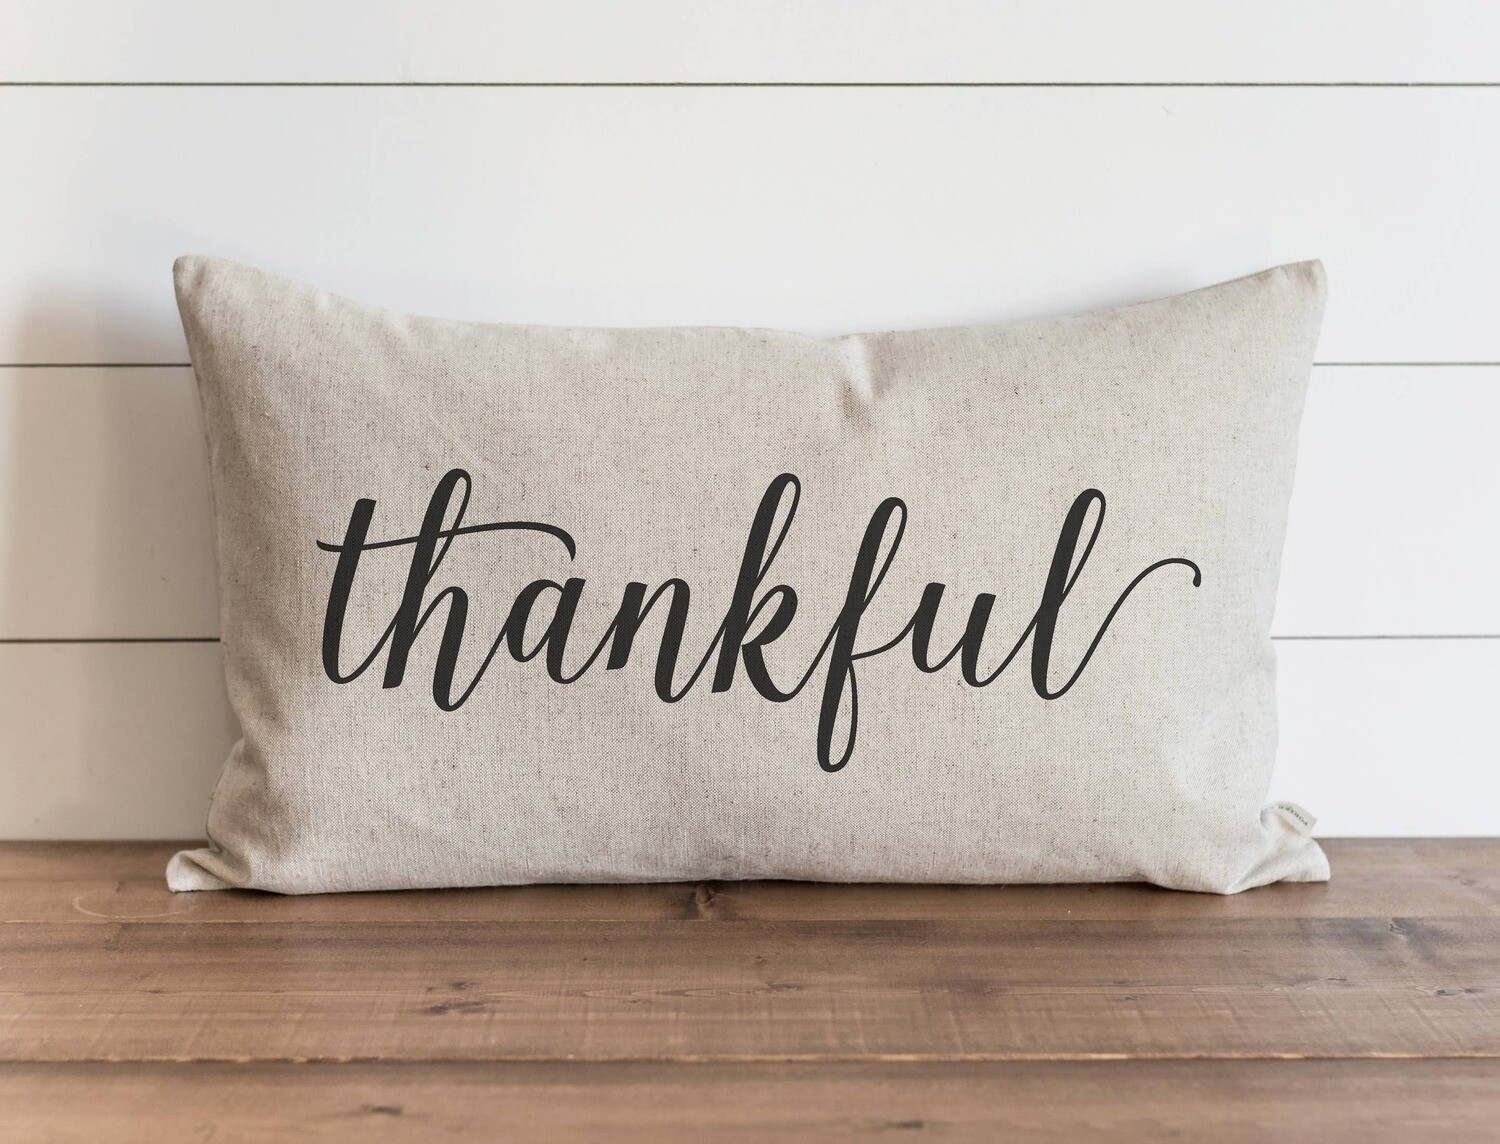 Thankful Pillow Cover.